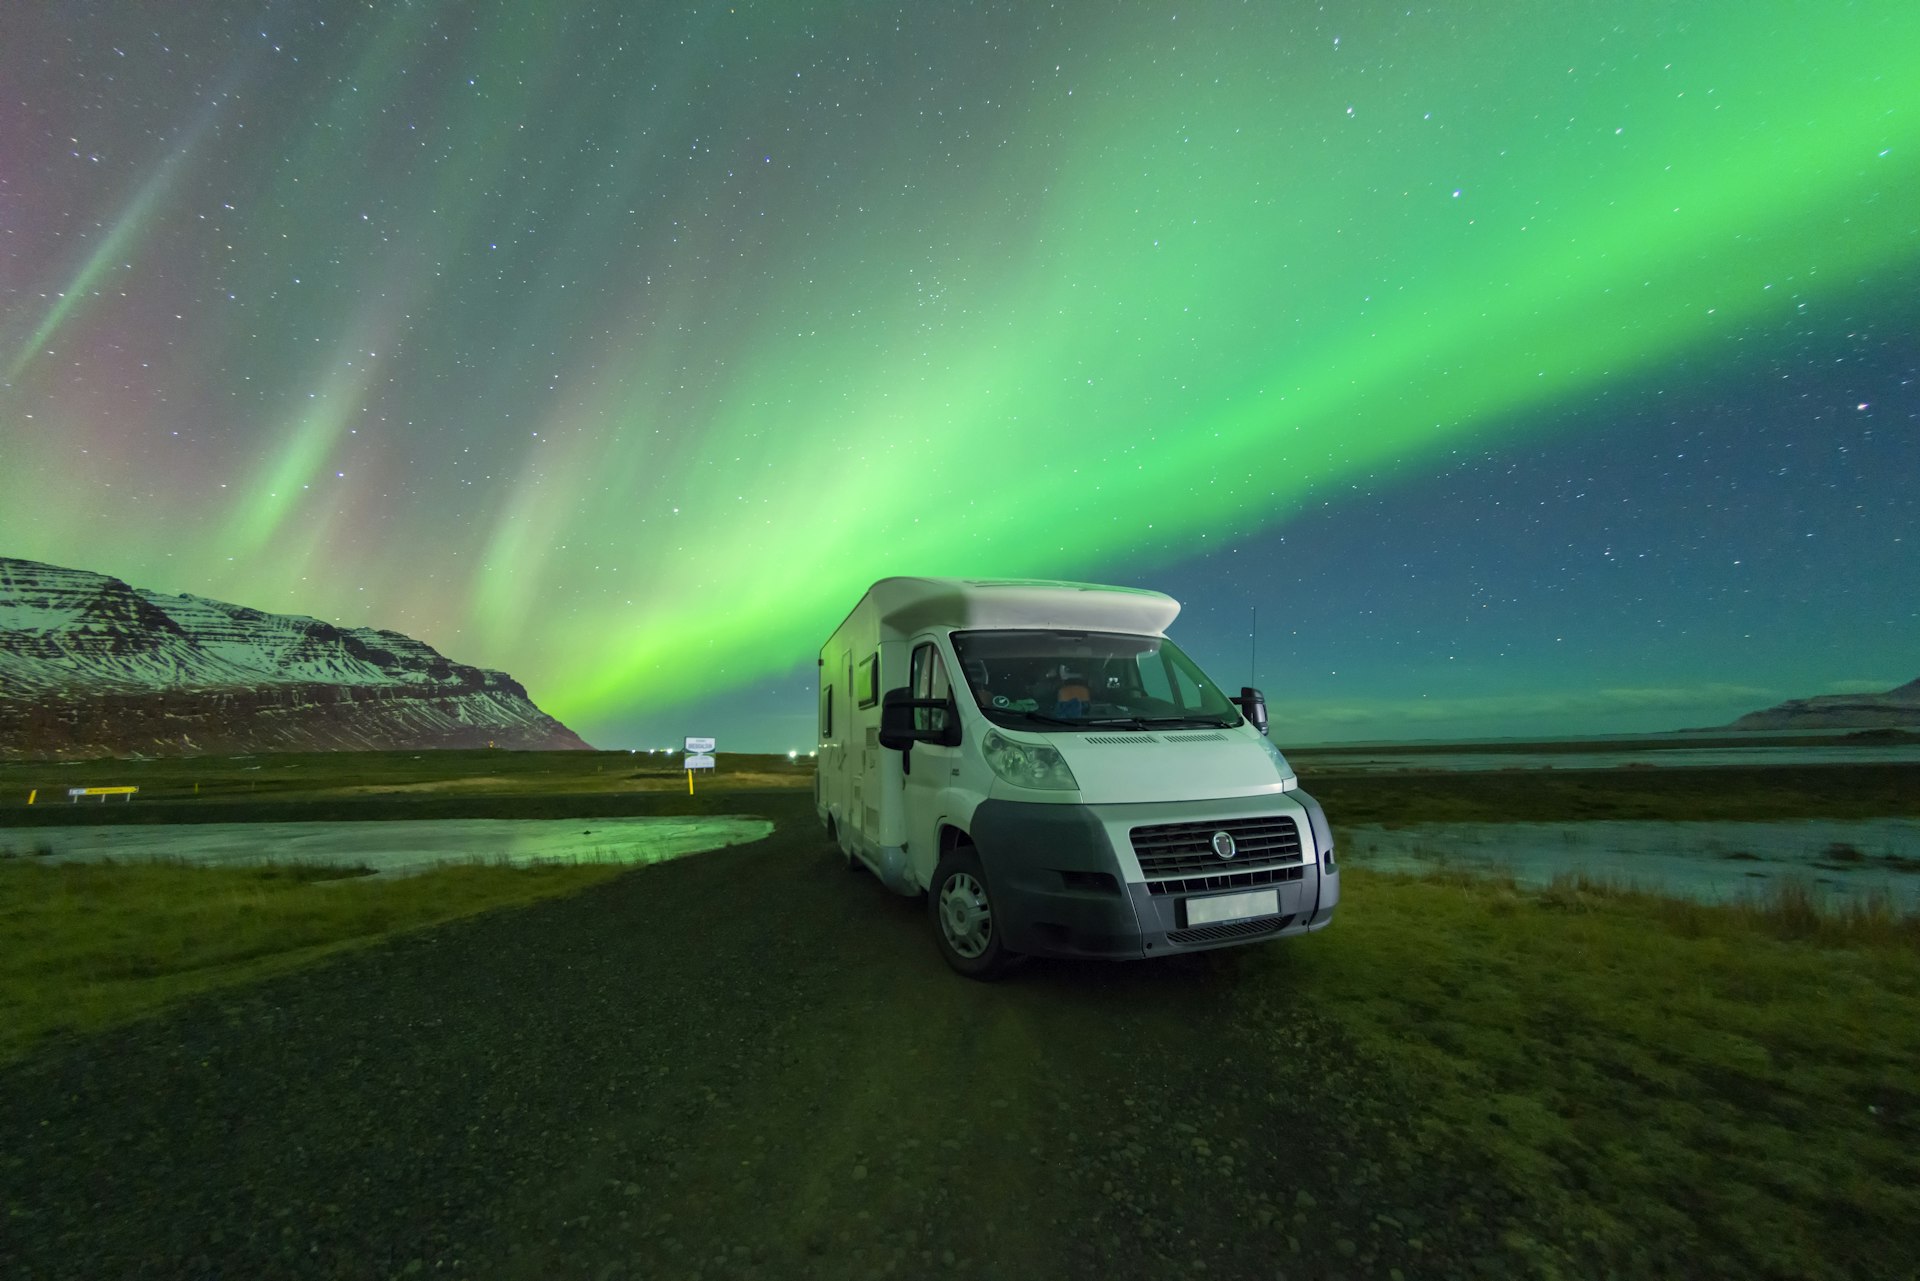 The northern lights appear above a campervan in an Iceland landscape